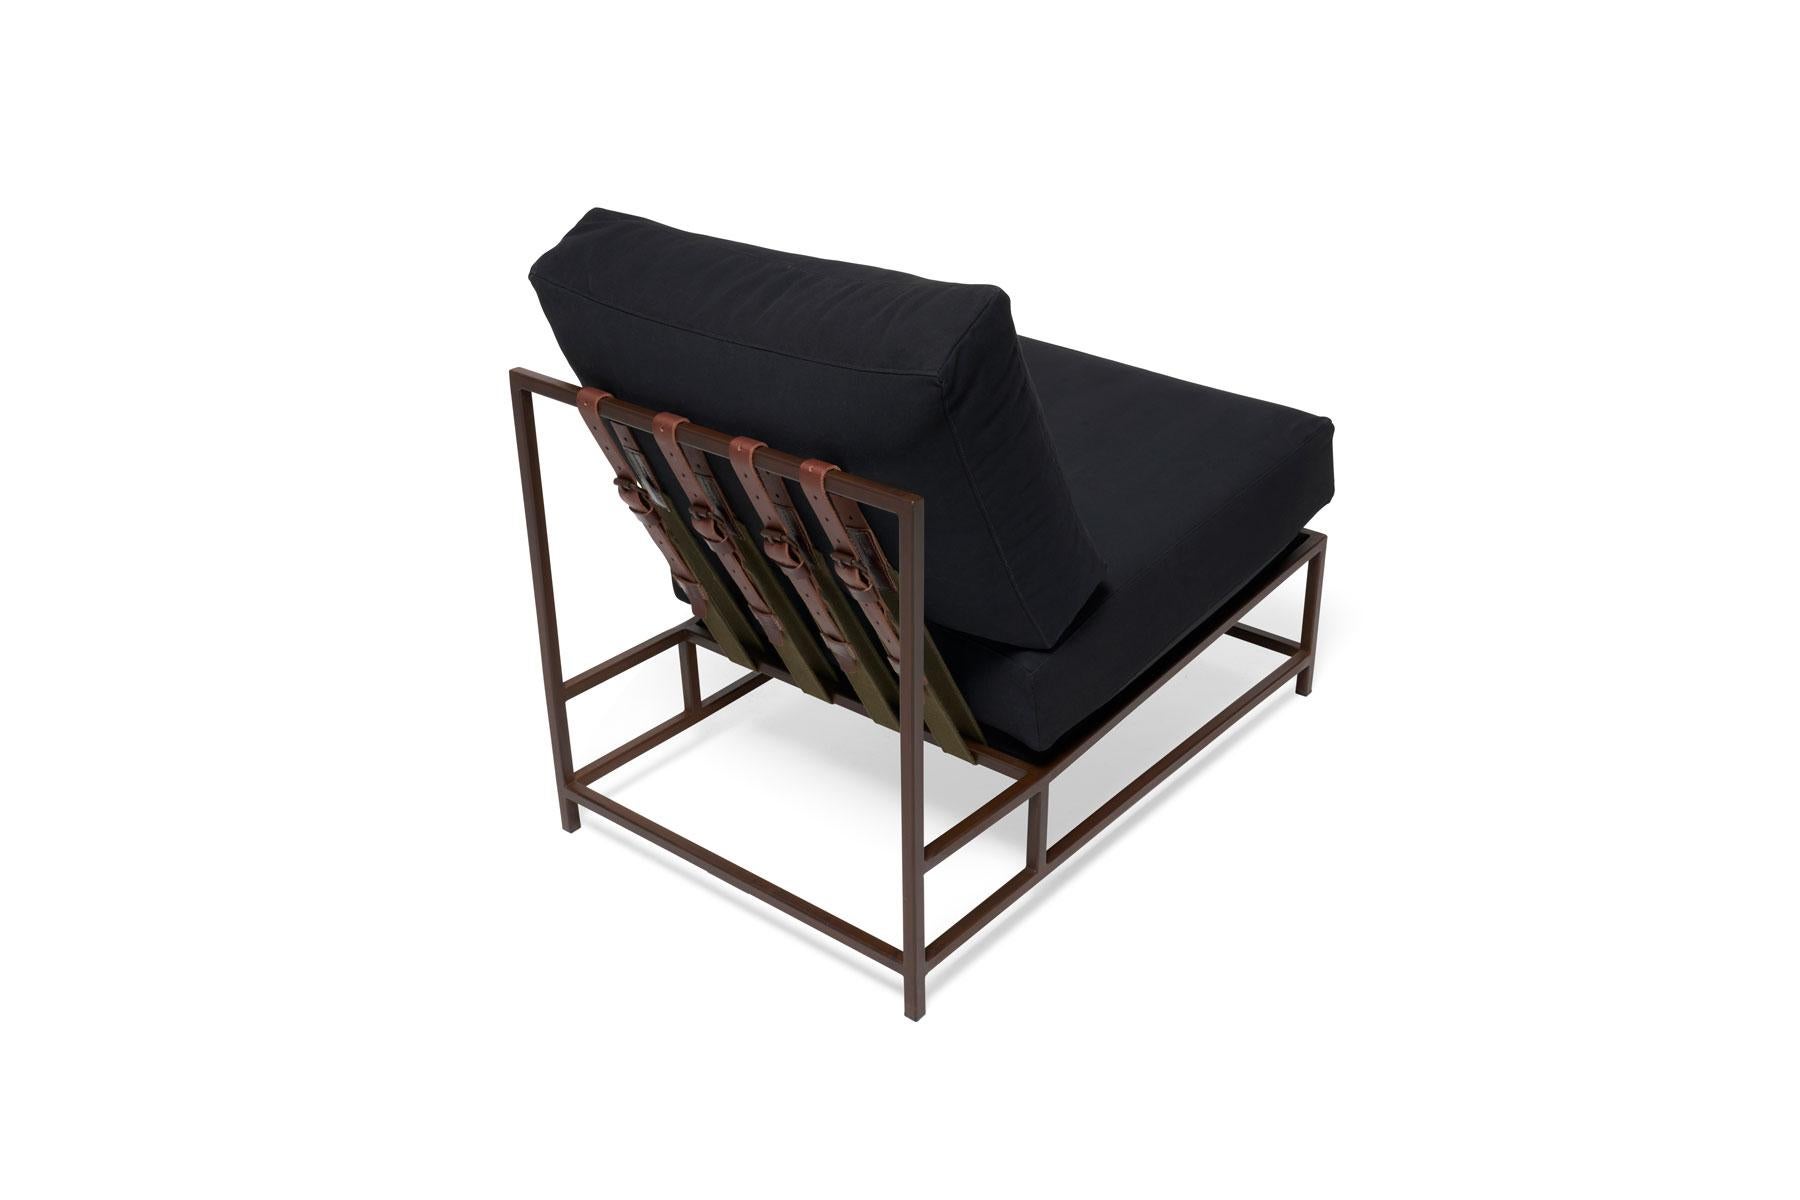 Steel Black Canvas and Marbled Rust Chair For Sale